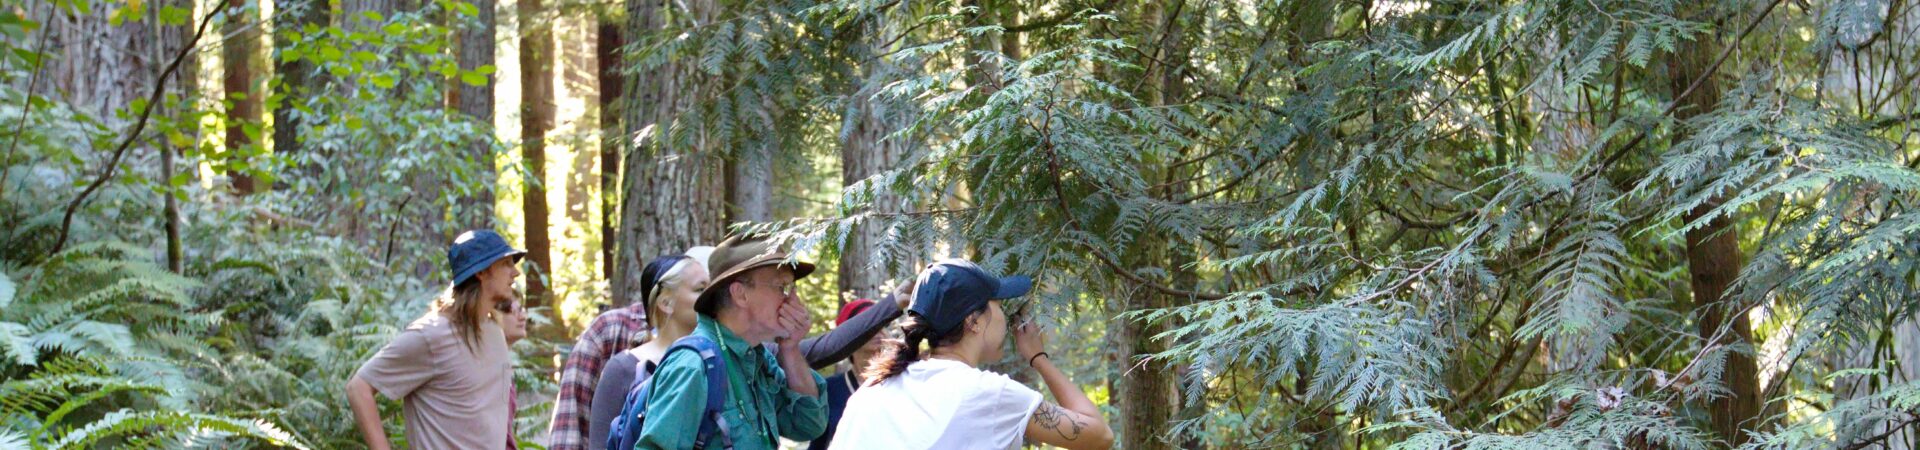 A group of 5 young adults are gathered along a trail surrounded by ferns and evergreen vegetation. A young woman in a baseball hat and a white t-shirt holds a branch to her nose for a smell. A tour guide in a green button down shirt and a sun hat holds a leaf to his nose and is smiling.